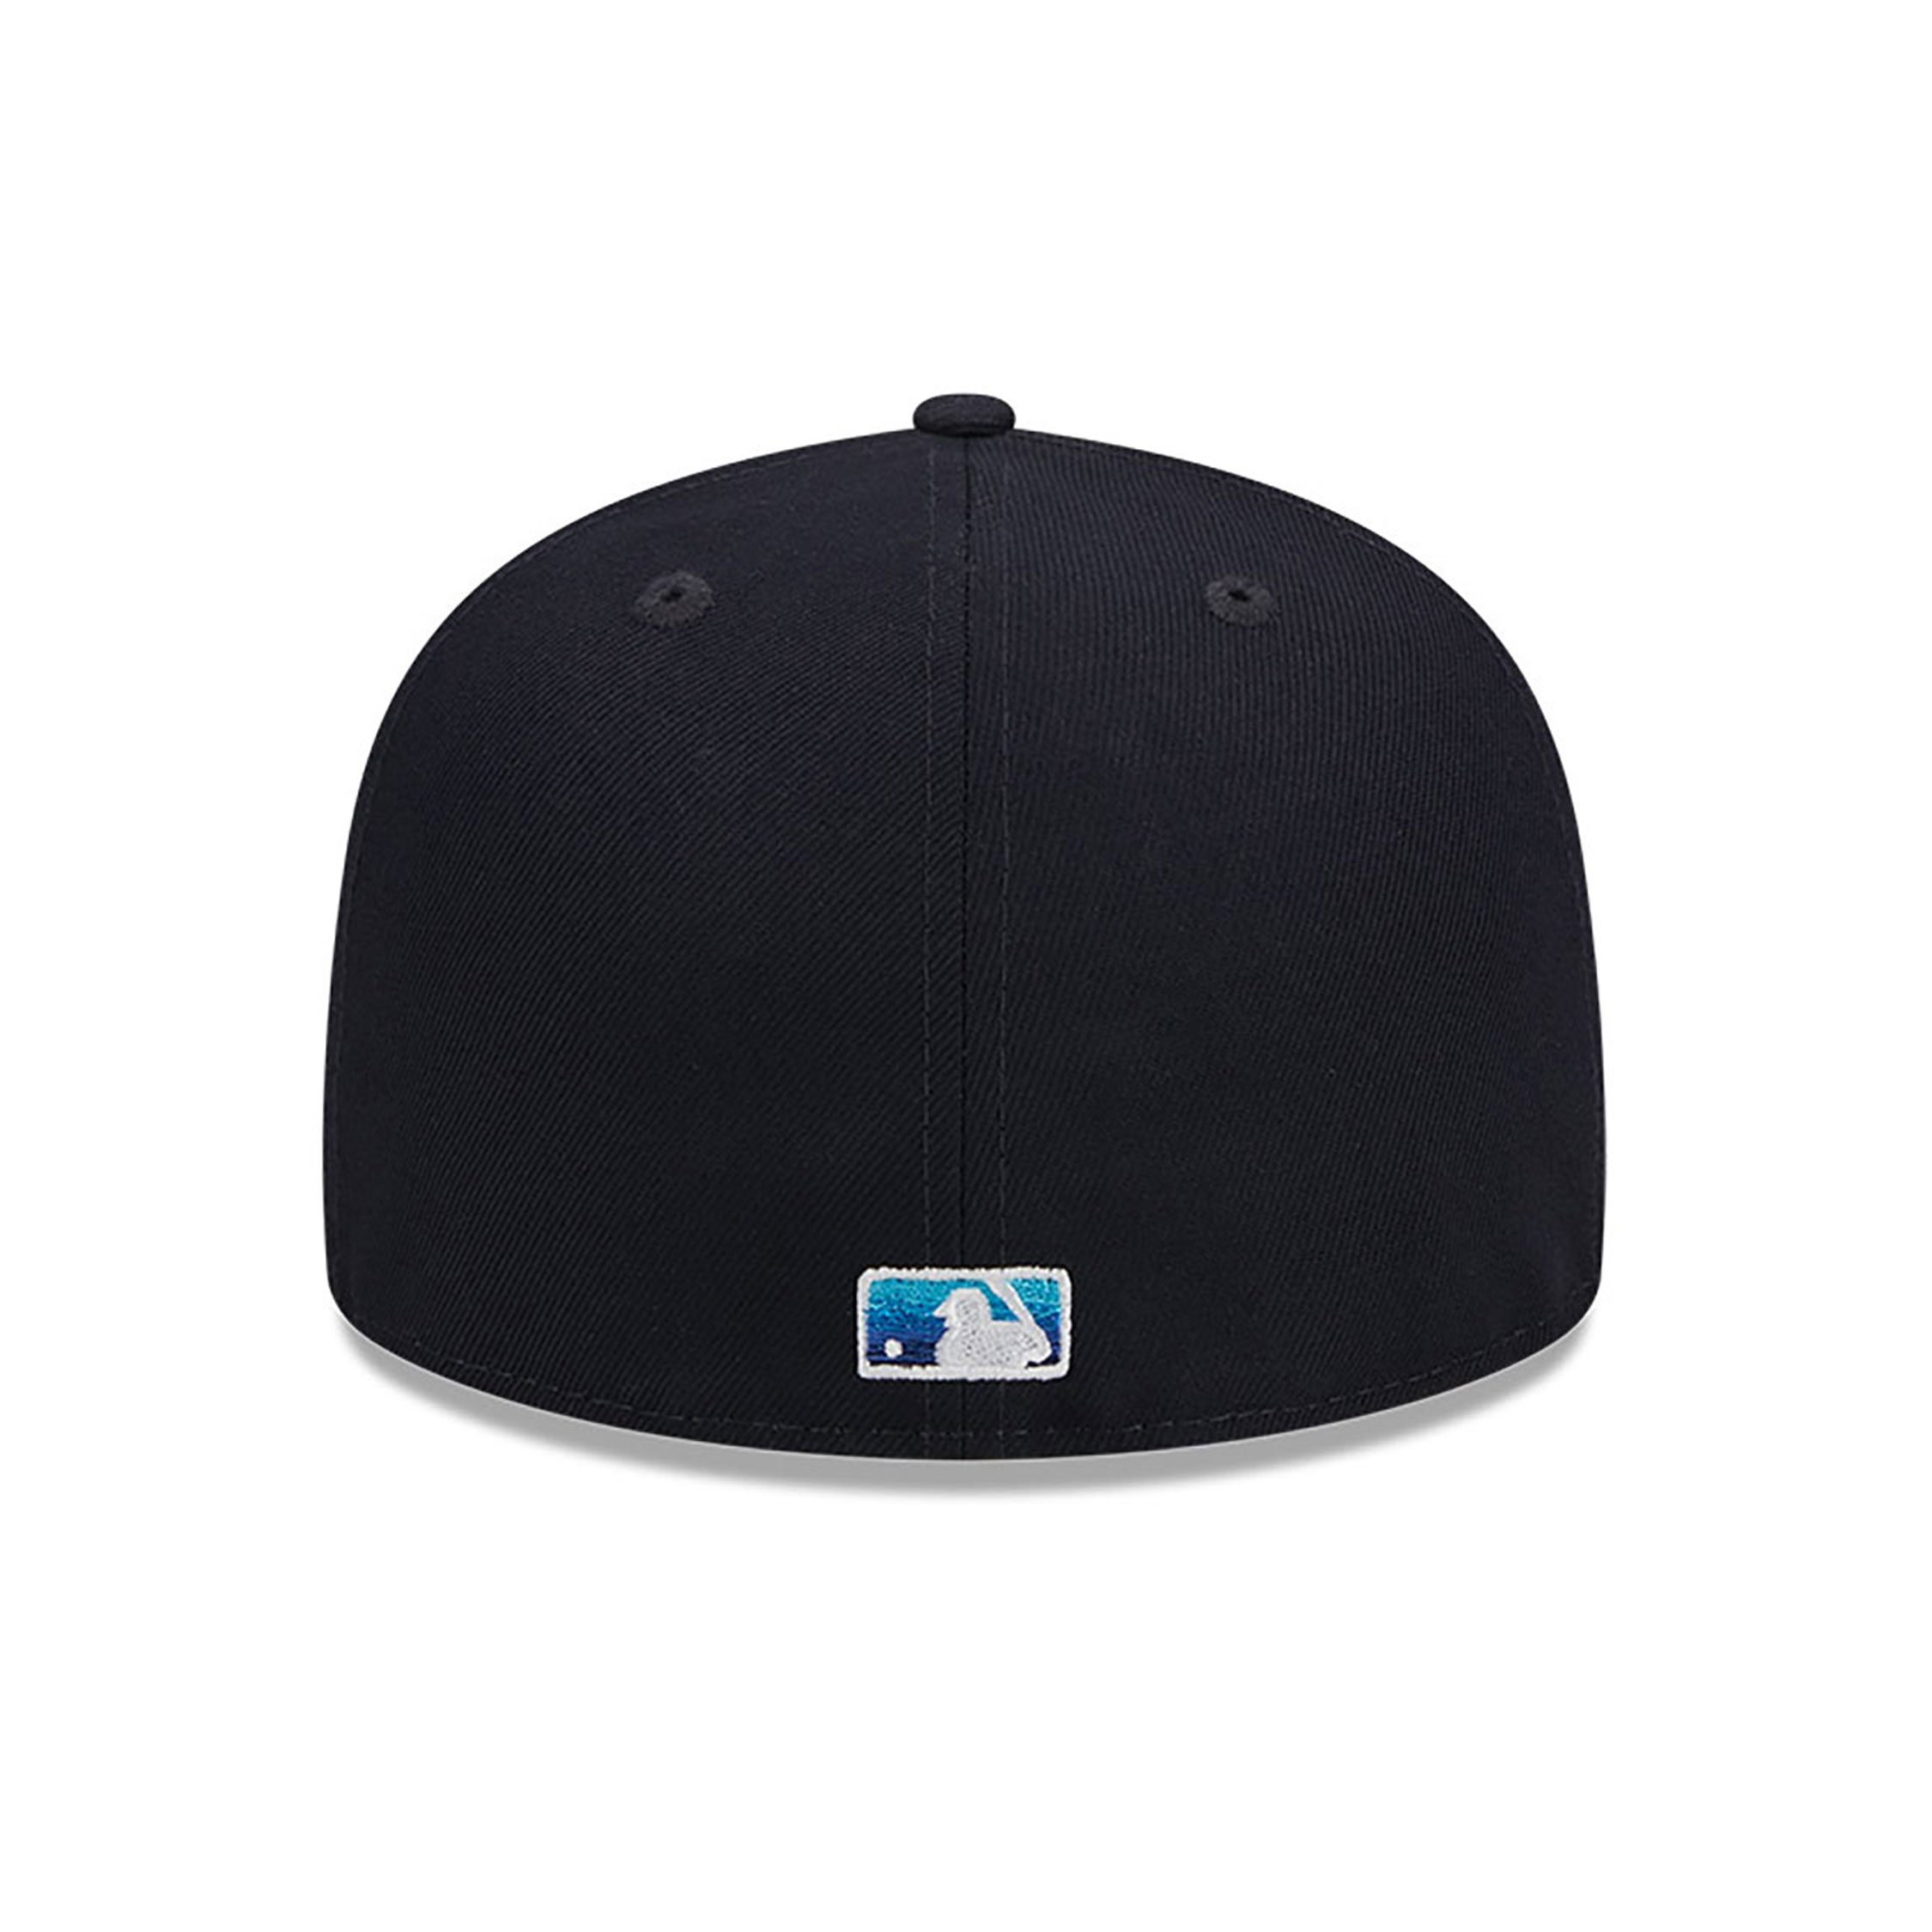 Atlanta Braves Gradient Navy 59FIFTY Fitted Cap